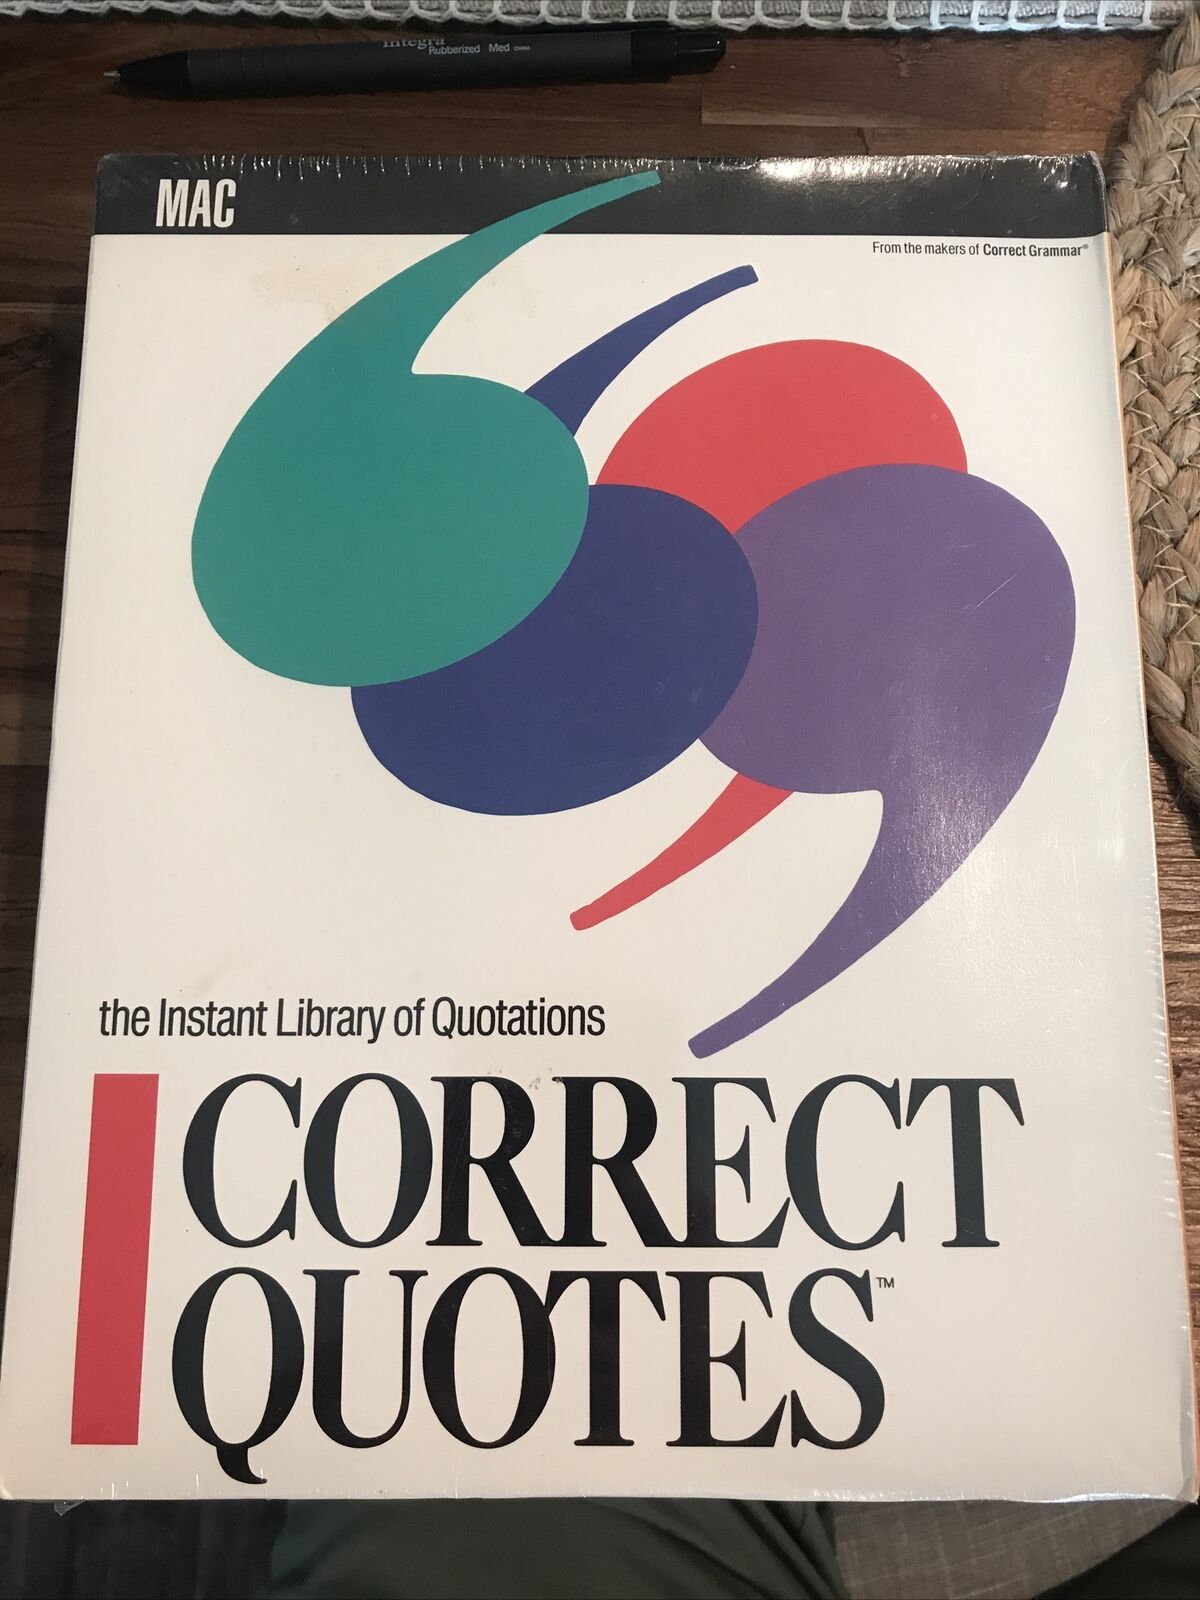 EXTREMELY RARE VINTAGE 1991 CORRECT QUOTES FOR MAC NEW-SEALED